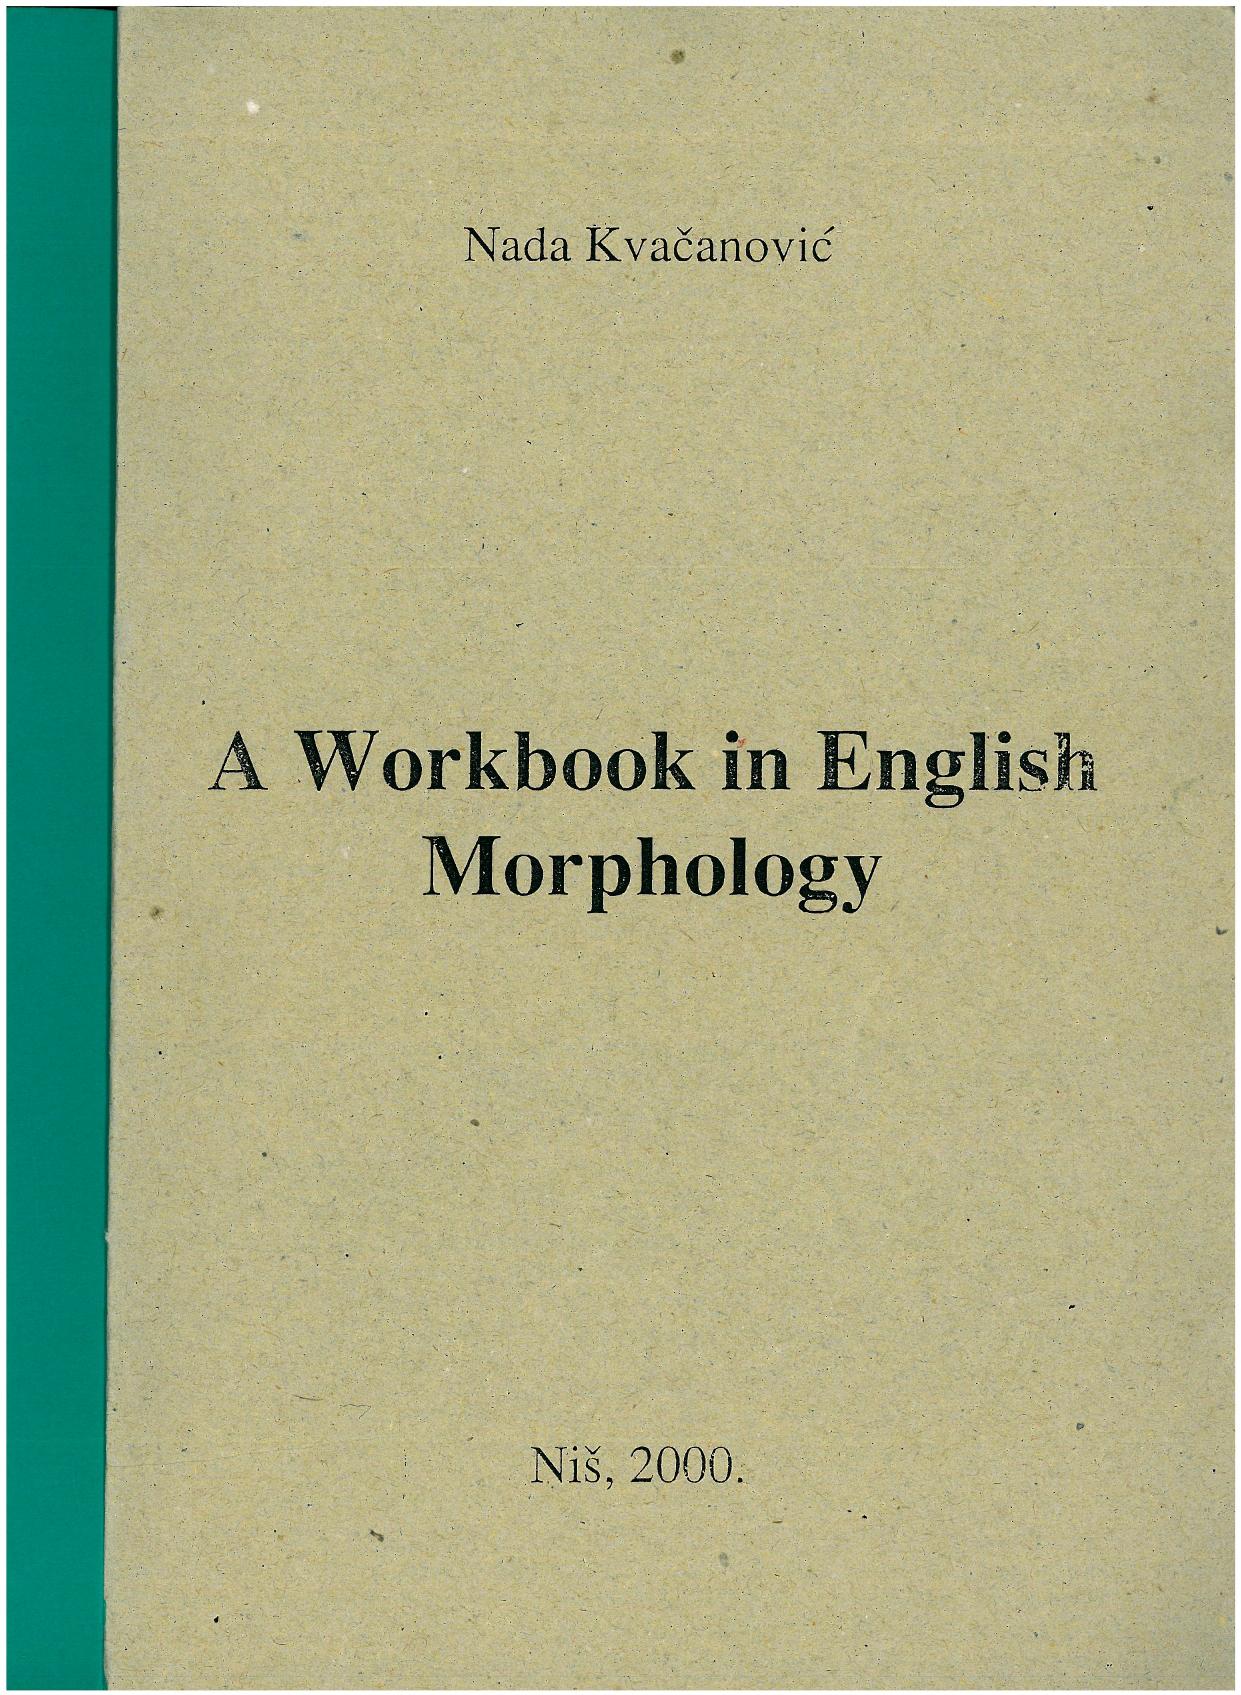 A Workbook in English Morphology